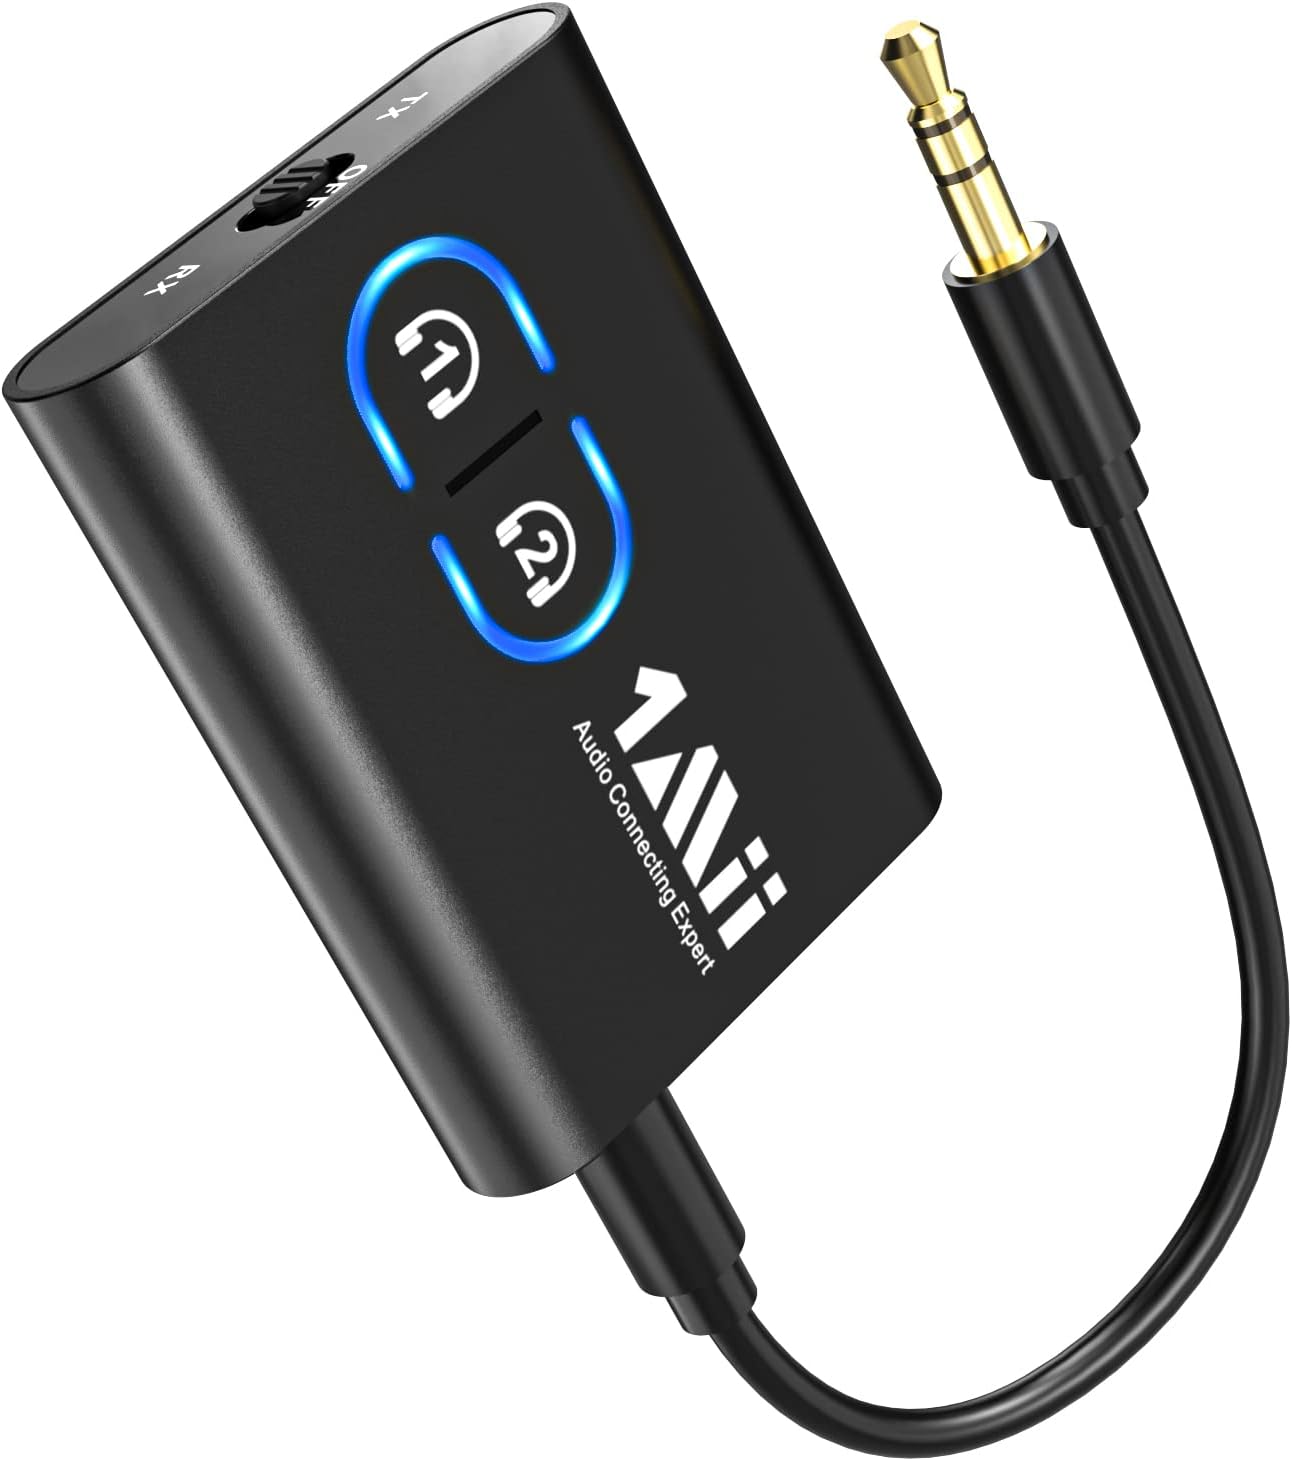 Bluetooth 5.3 Receiver for Home Stereo, Low Latency & HD Bluetooth Music  Audio Adapter for Speakers/Wired Speakers/Home Music Streaming Stereo  System